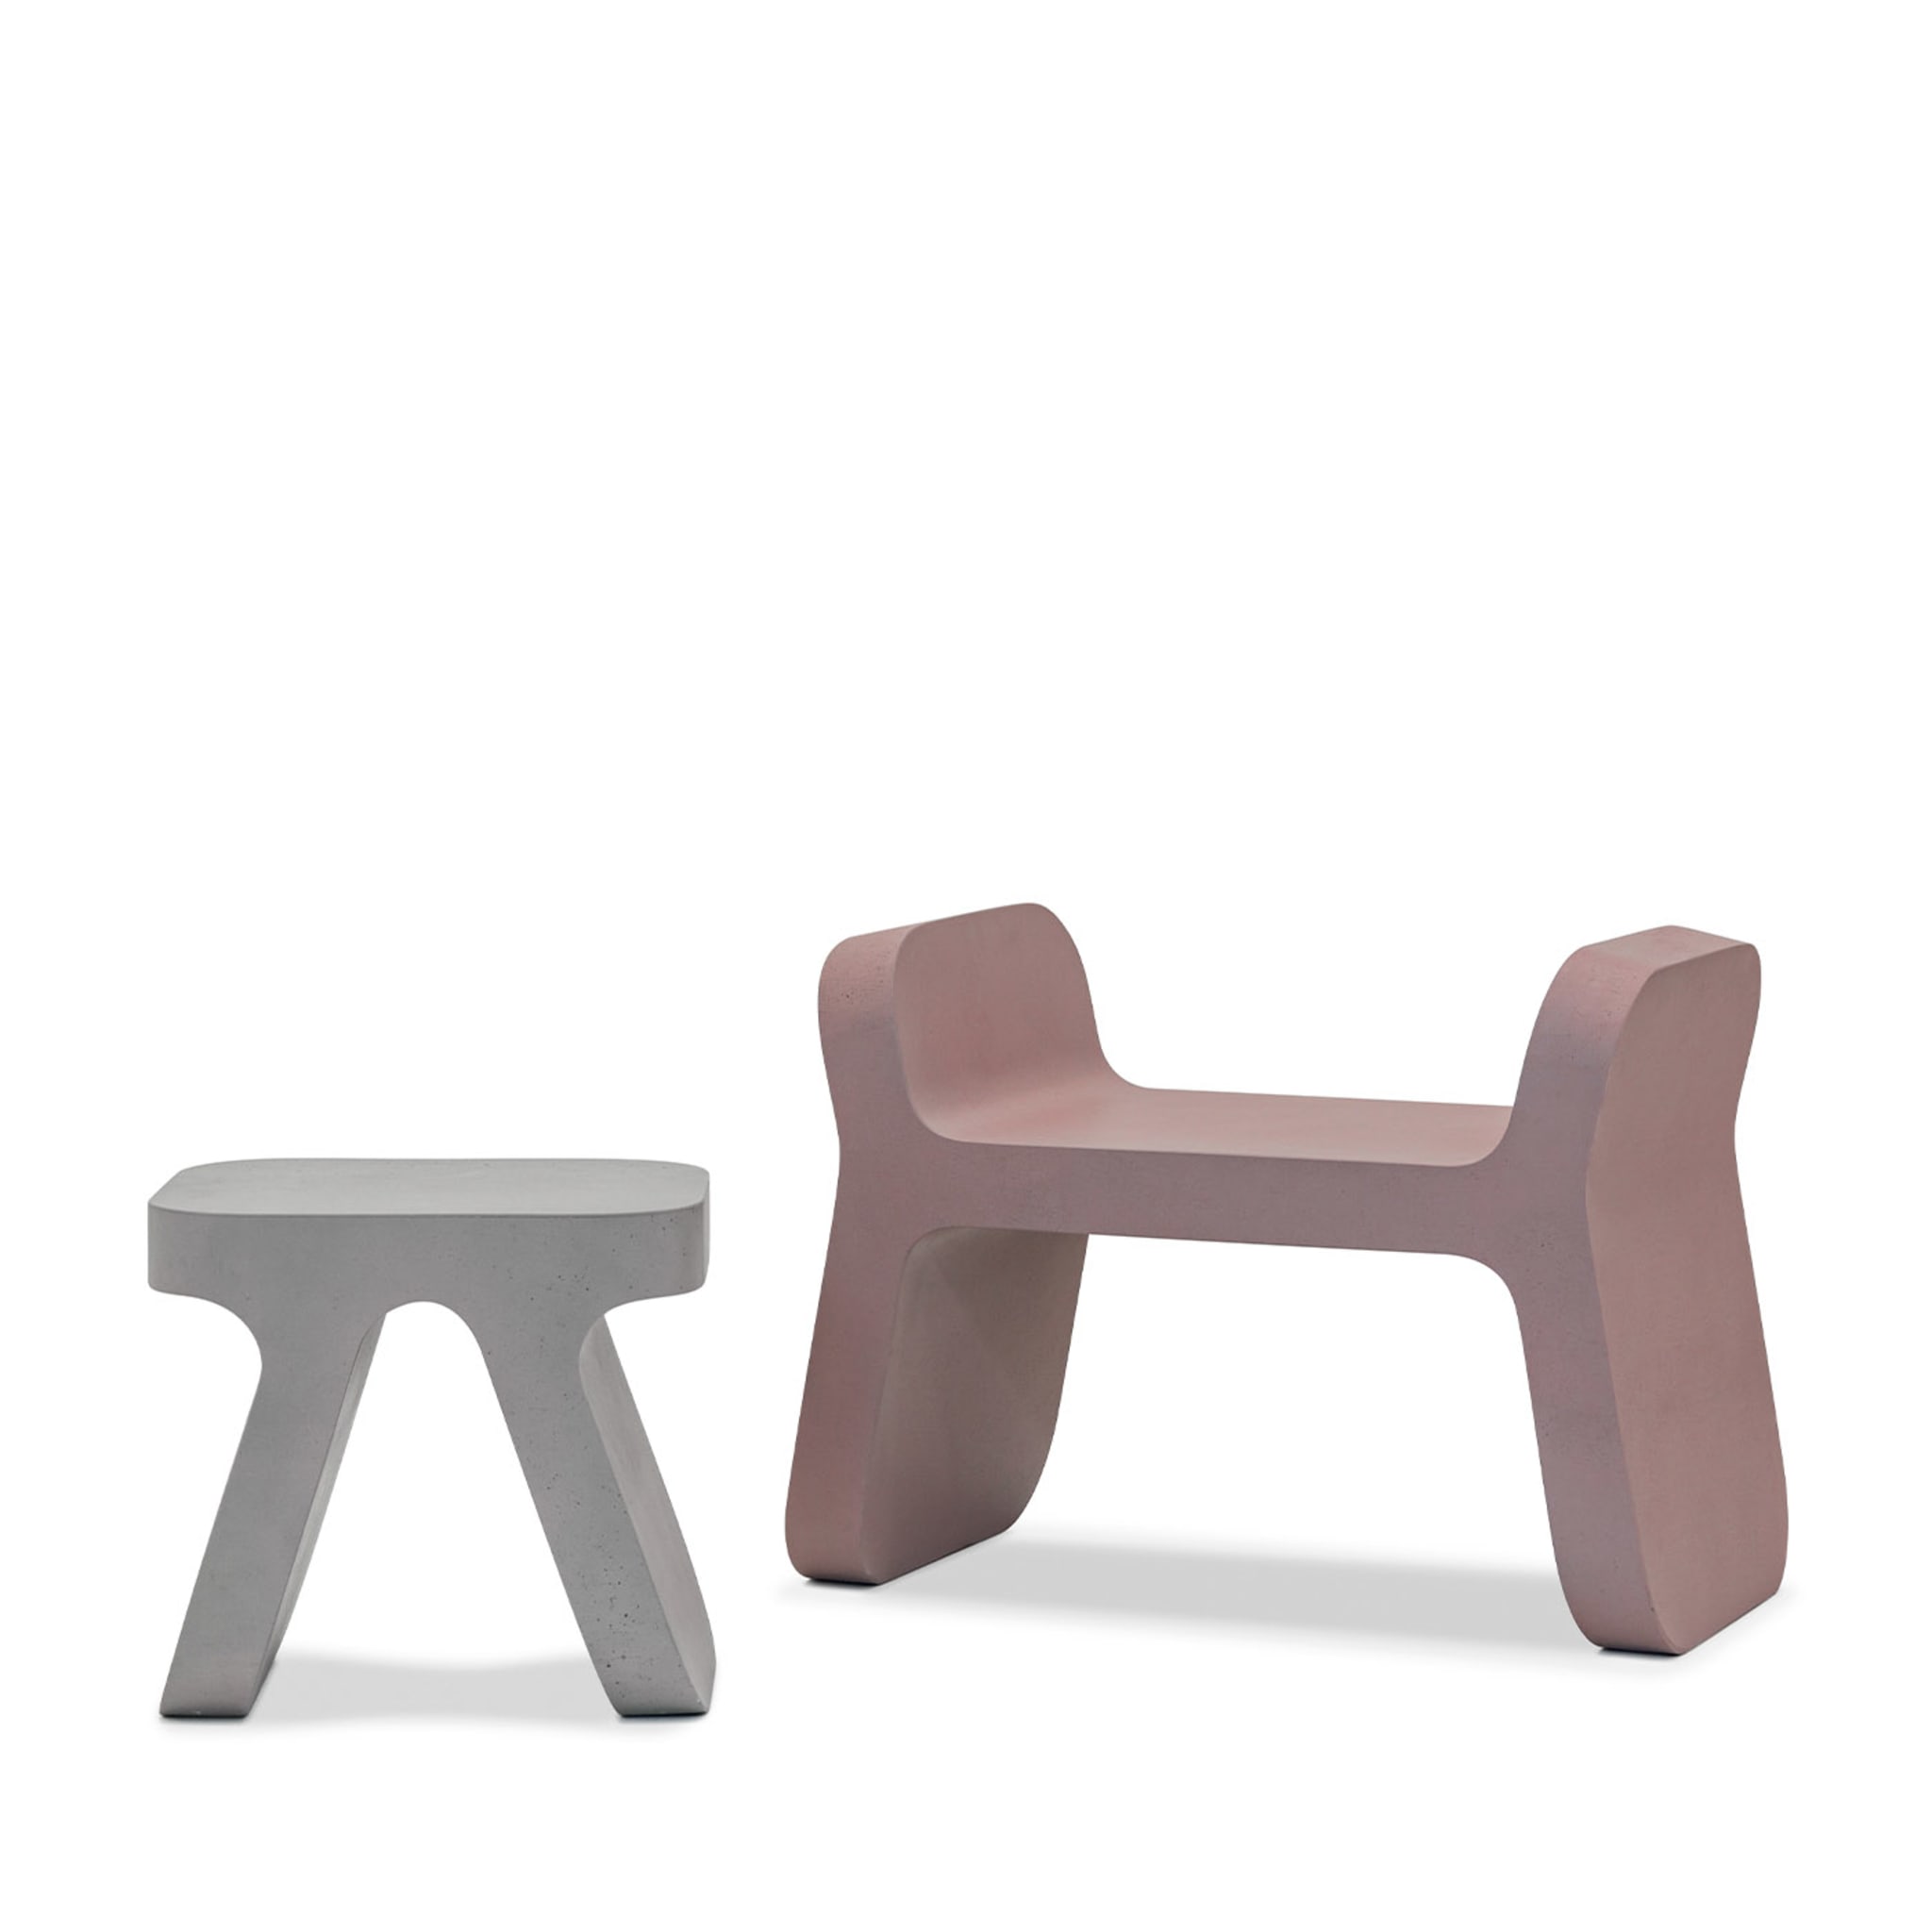 Torcello Small Bench by Defne Koz and Marco Susani - Alternative view 2